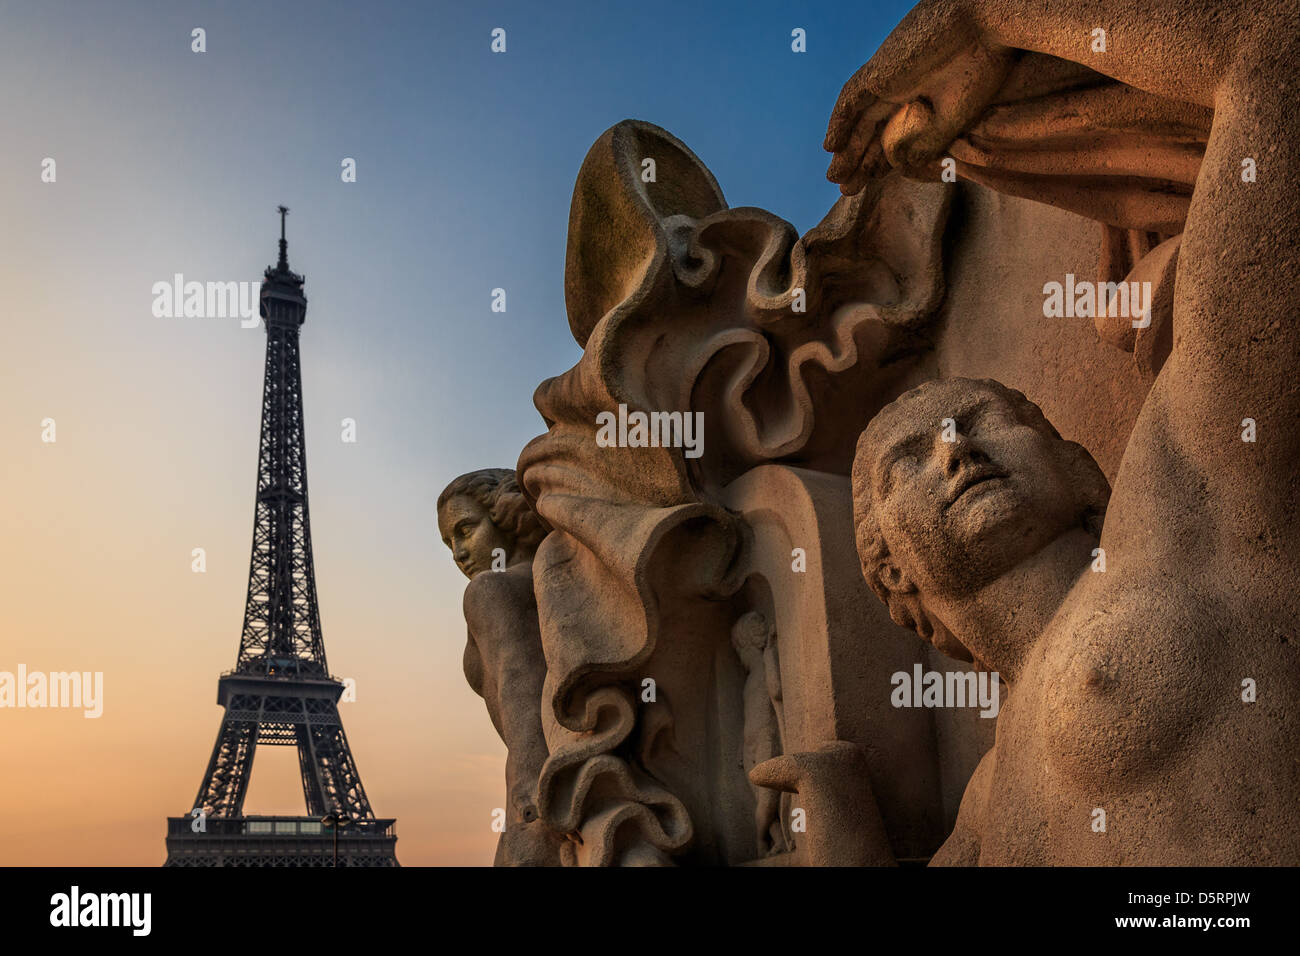 Sculptures from Jardins du Trocadero with the Eiffel Tower in the background, Paris, France Stock Photo